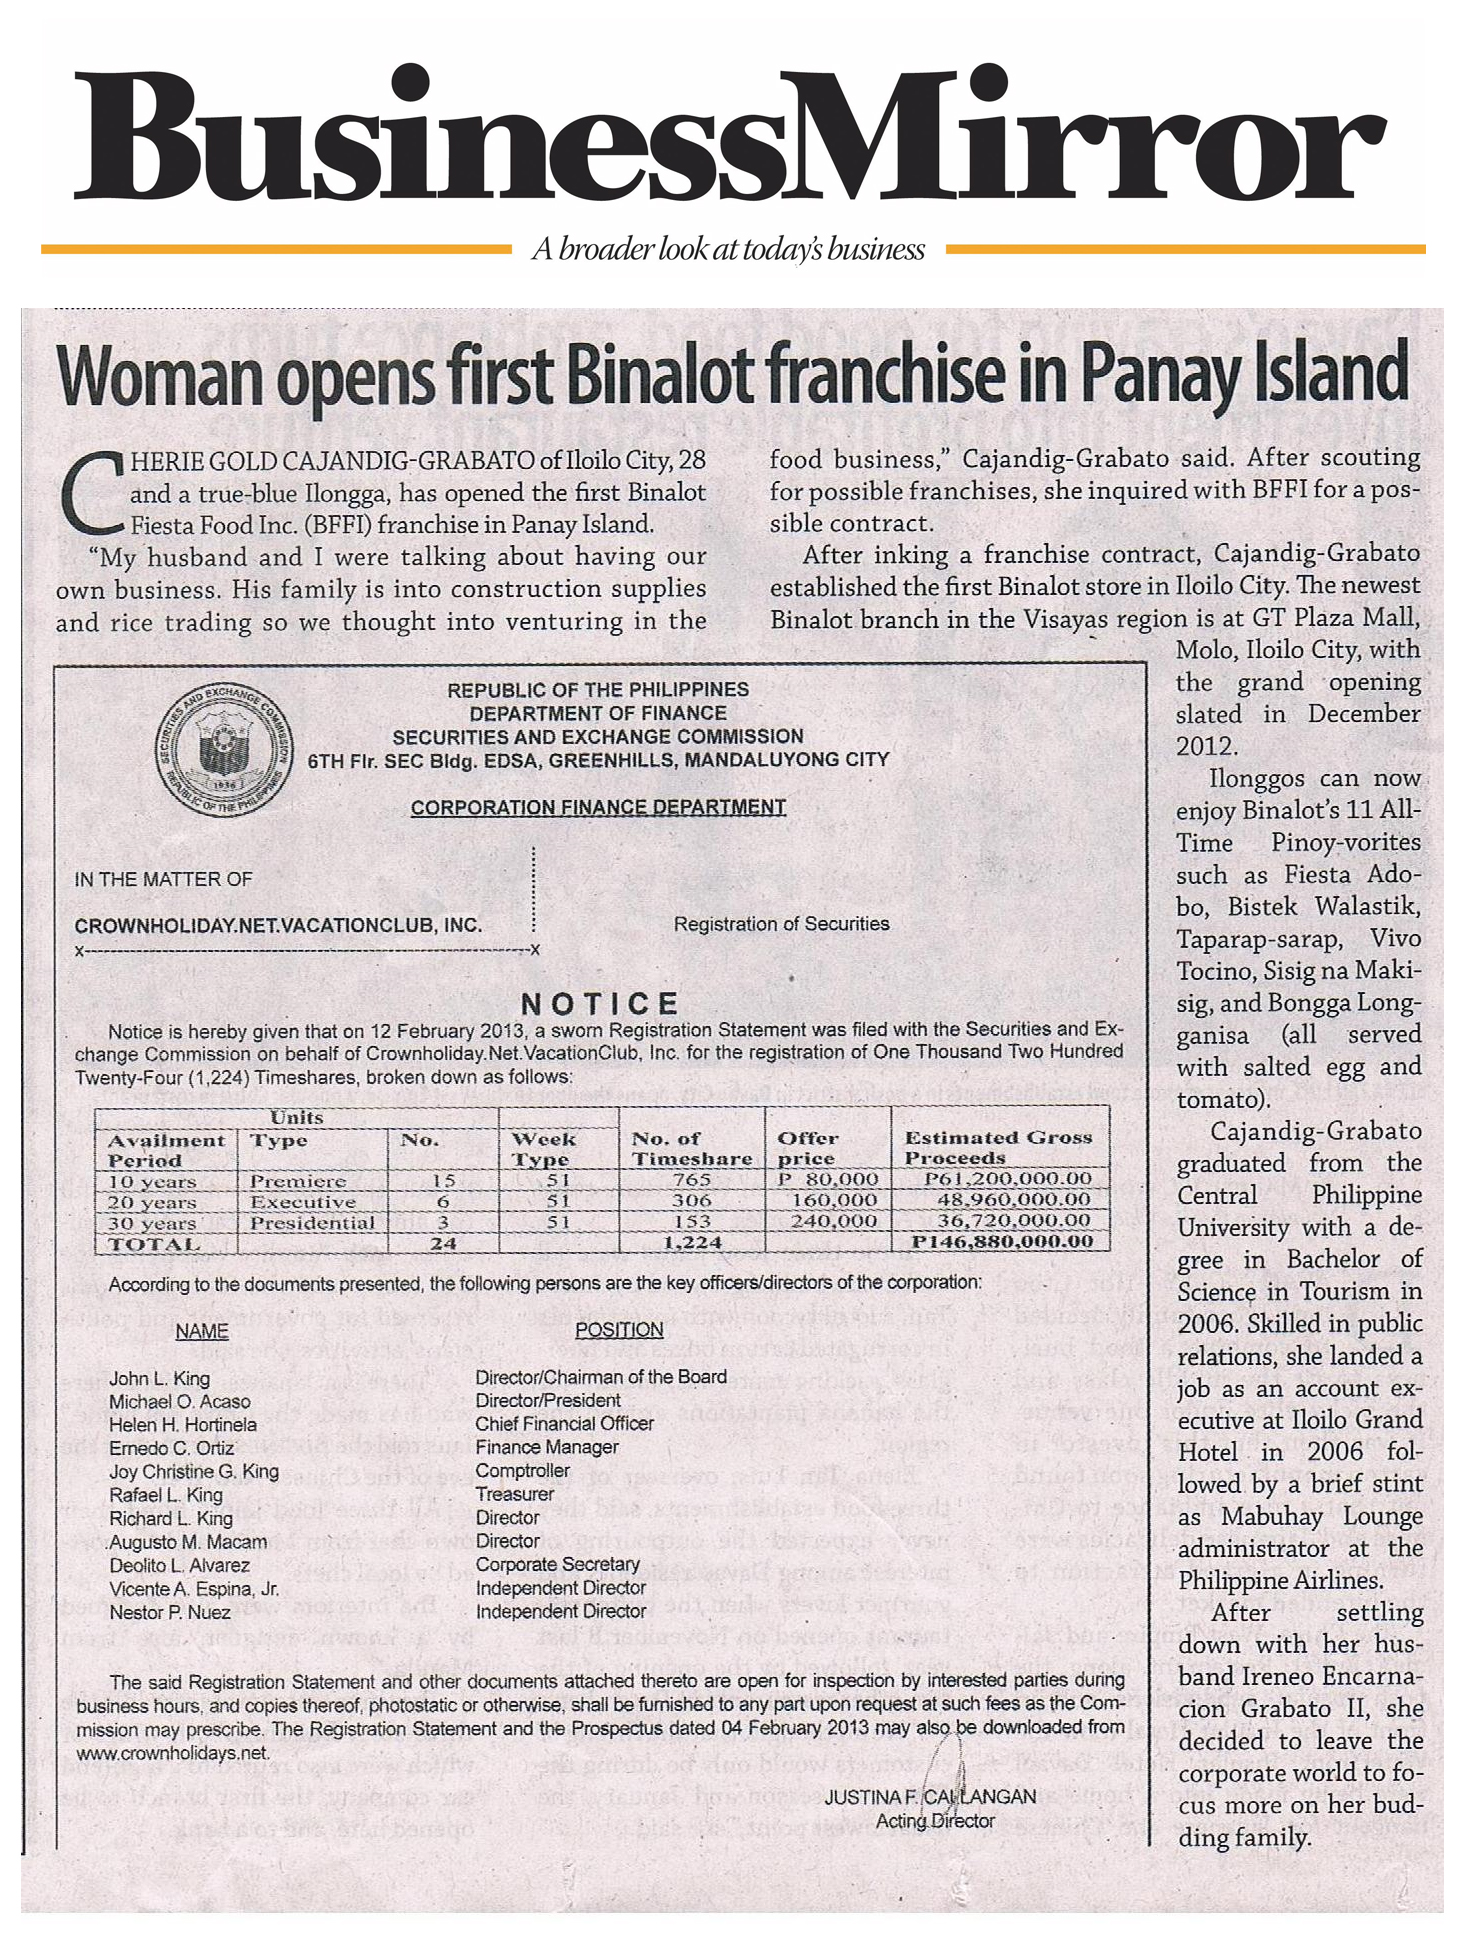 Woman opens first Binalot franchise in Panay Island, February 18, 2013, Business Mirror